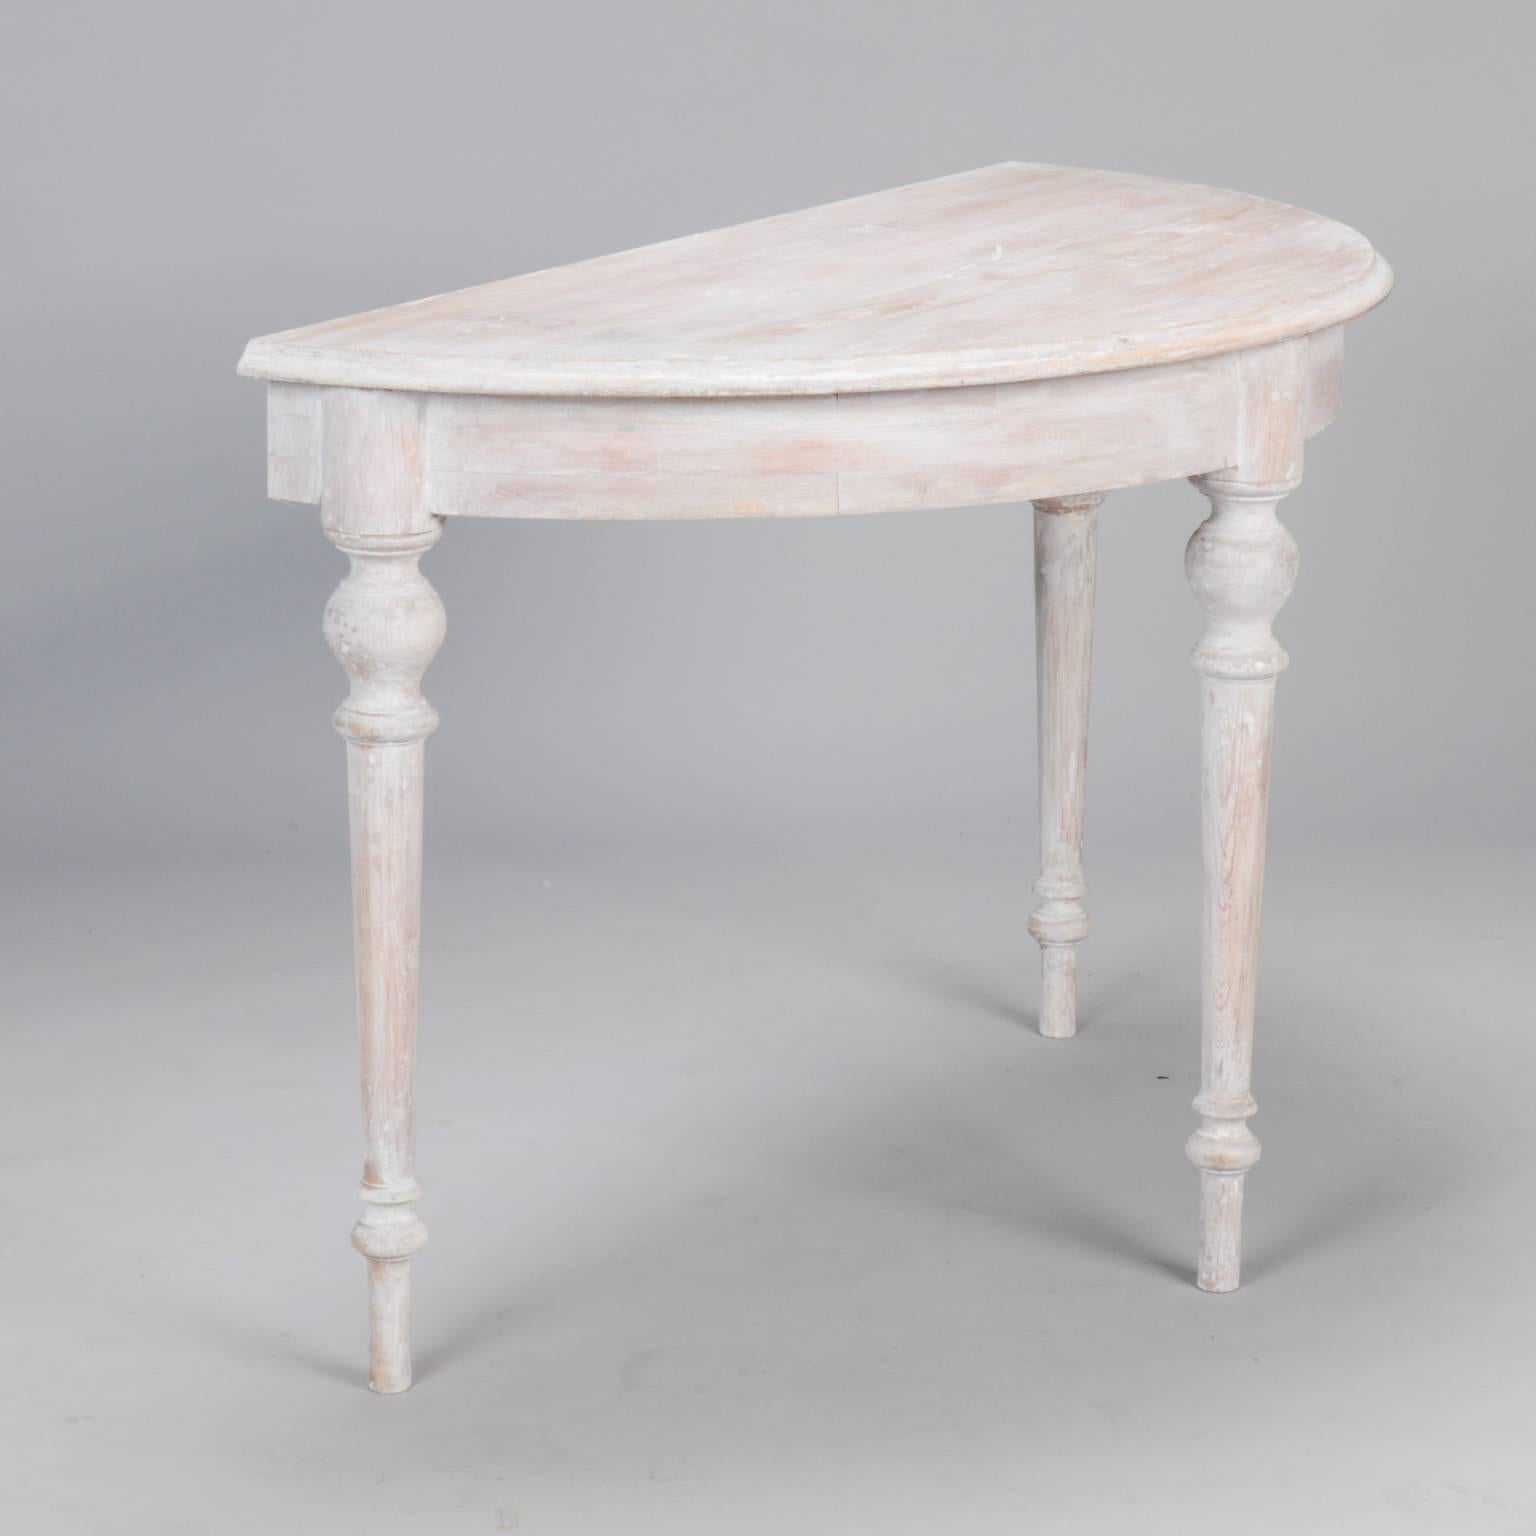 Pair of French demilune tables with turned legs and white painted finish, circa 1930s. These versatile pieces can be used as a pair of demilune tables, joined together to form a single round table or use the 17.5” leaf for a larger, oval table.